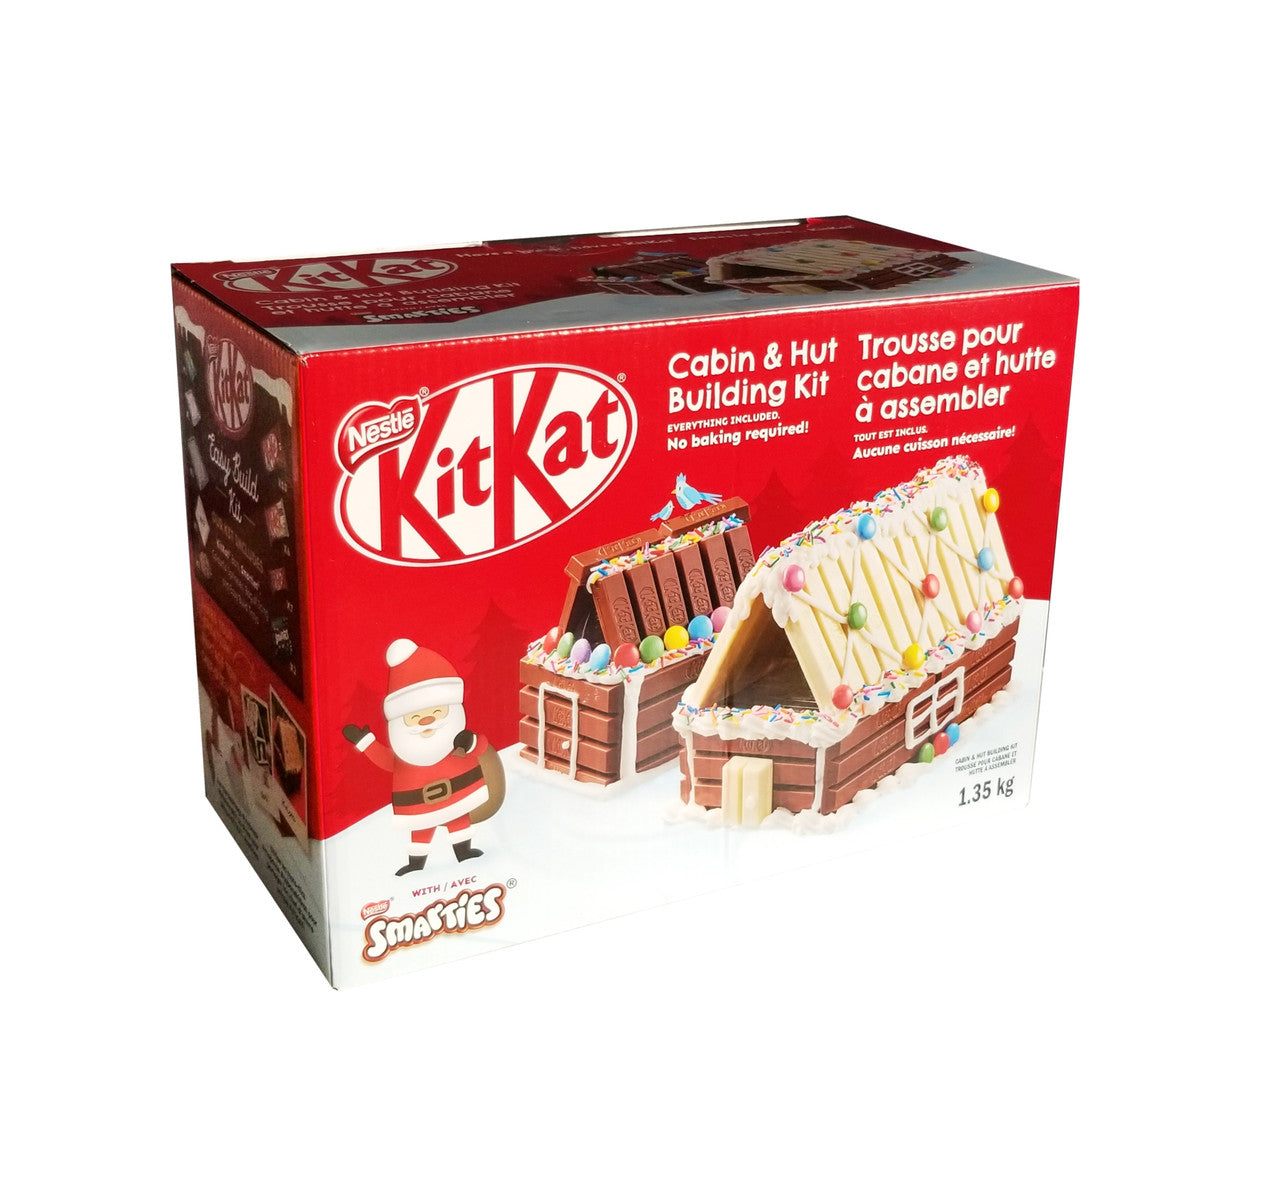 Nestle Kit Kat Cabin & Hut Building Kit, 1.35kg/2.9 lbs. {Imported from Canada}